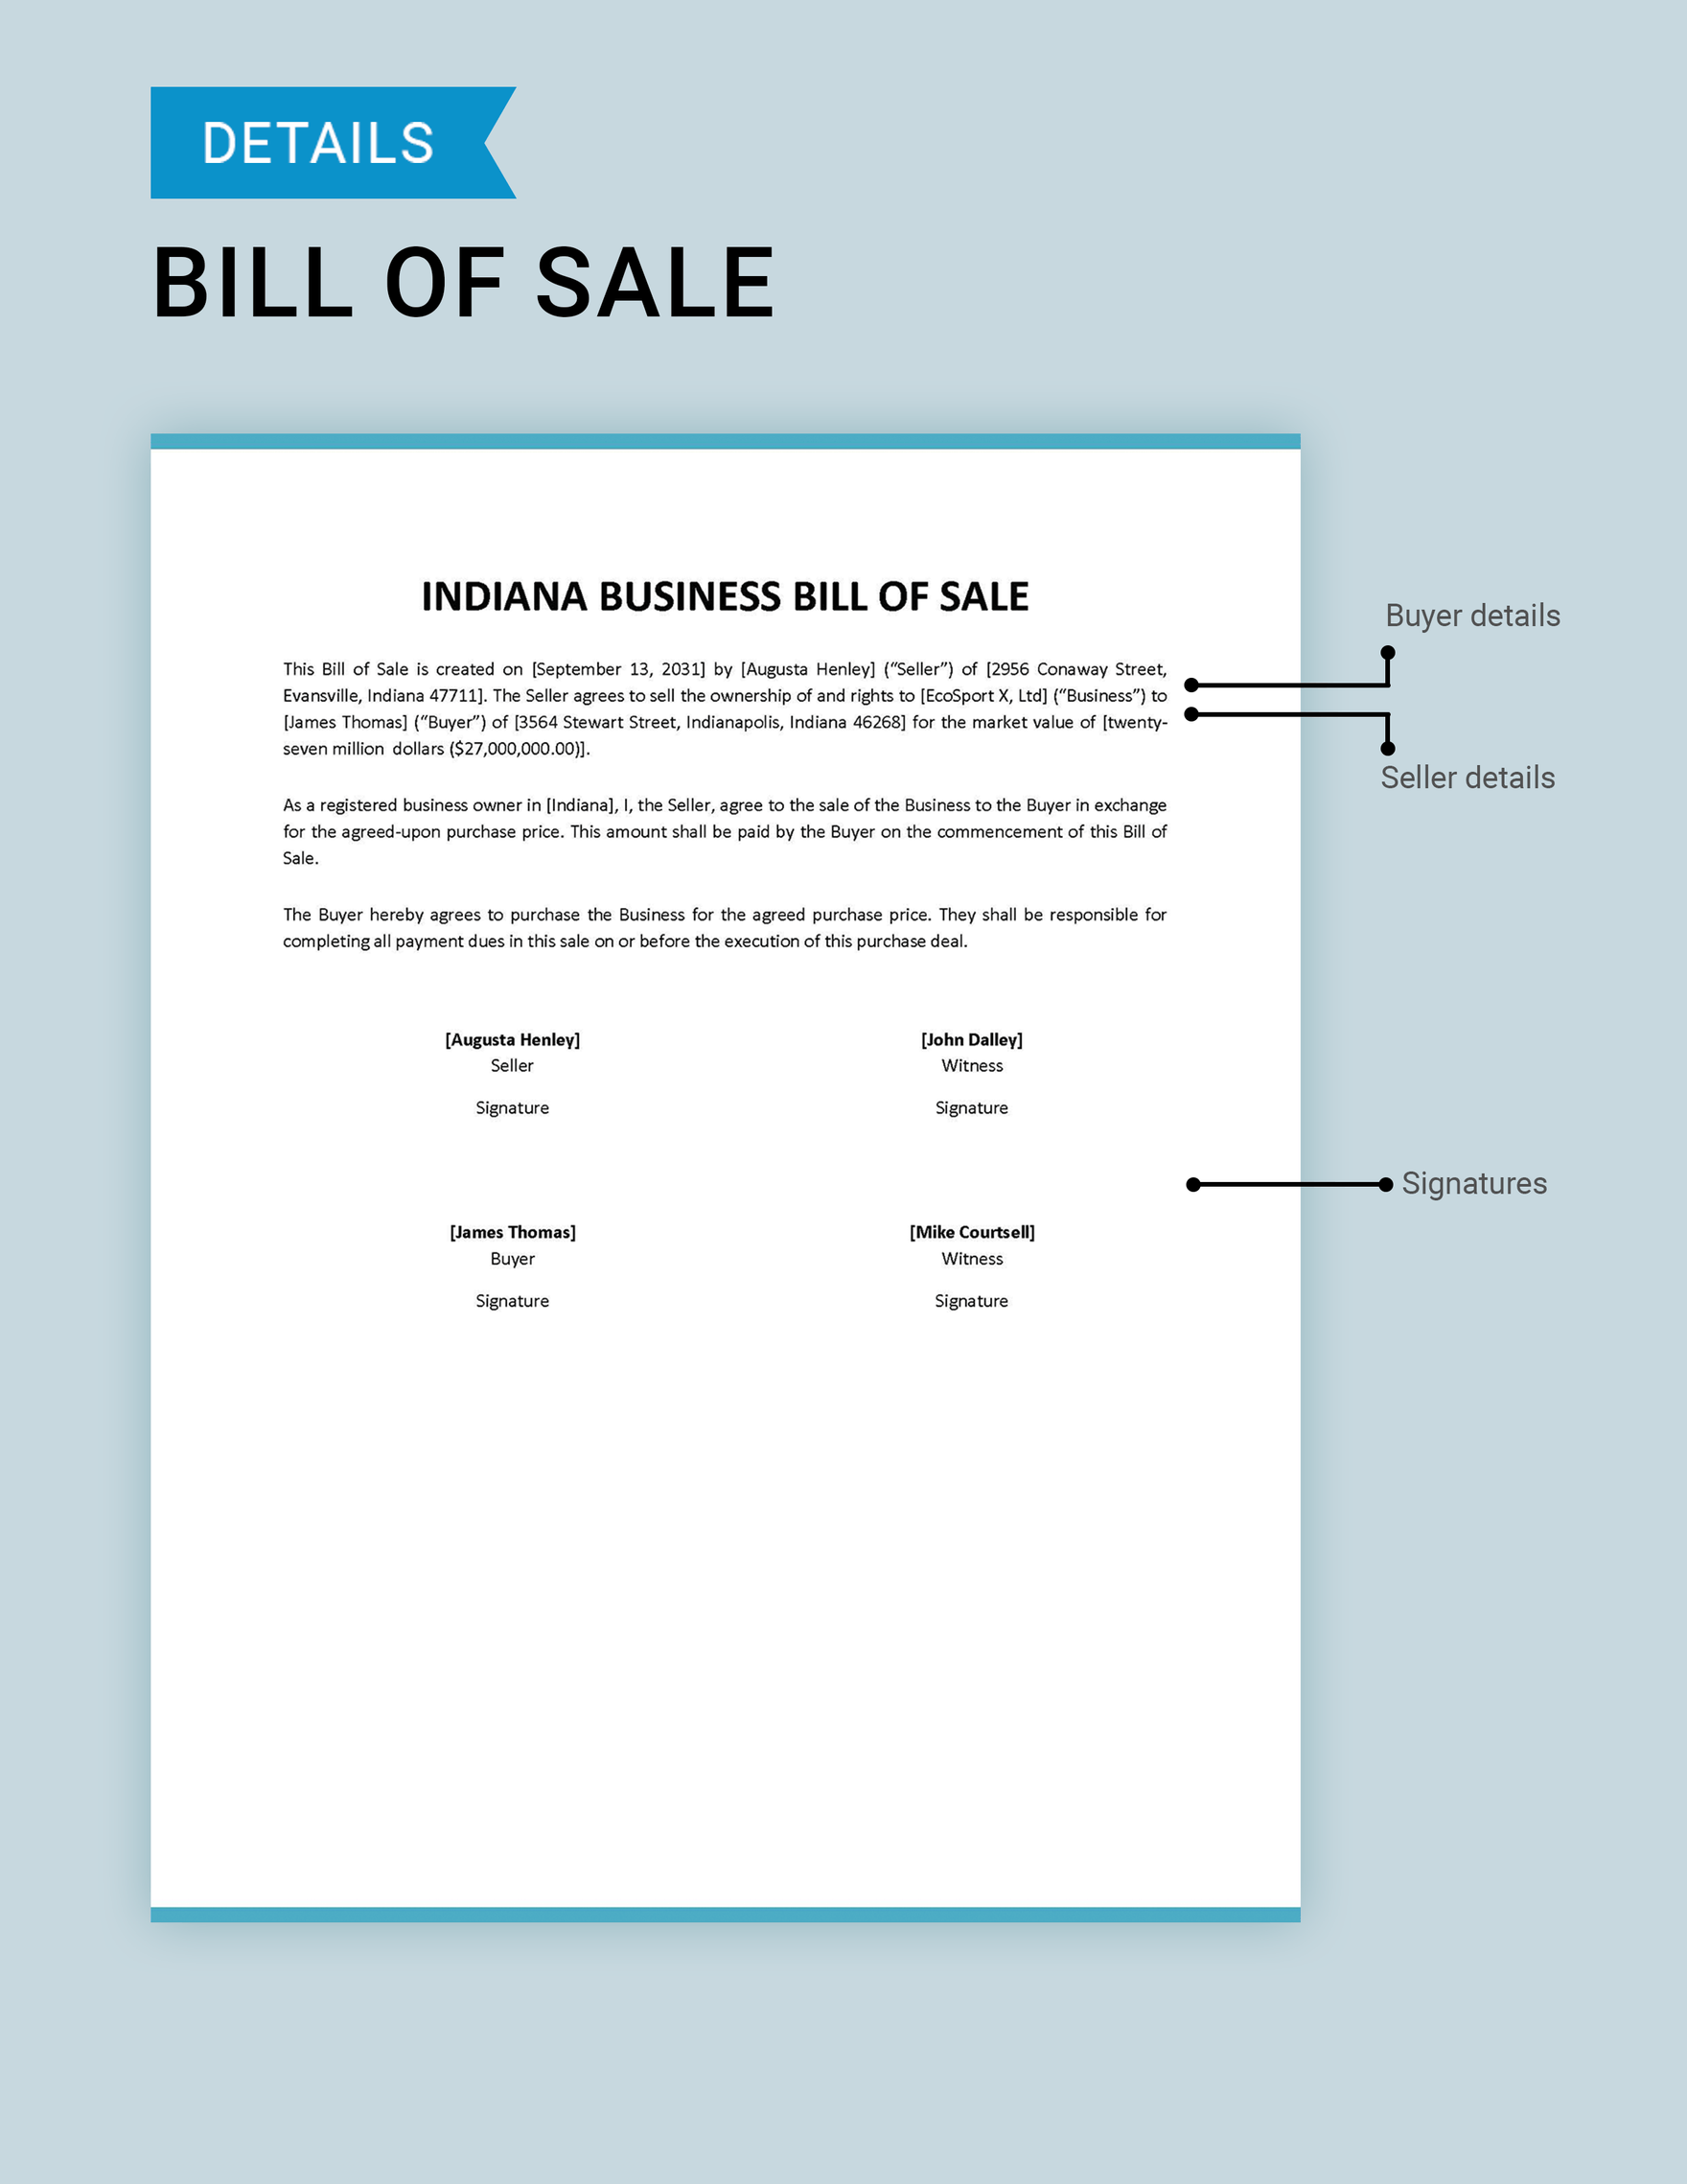 Indiana Business Bill of Sale Template